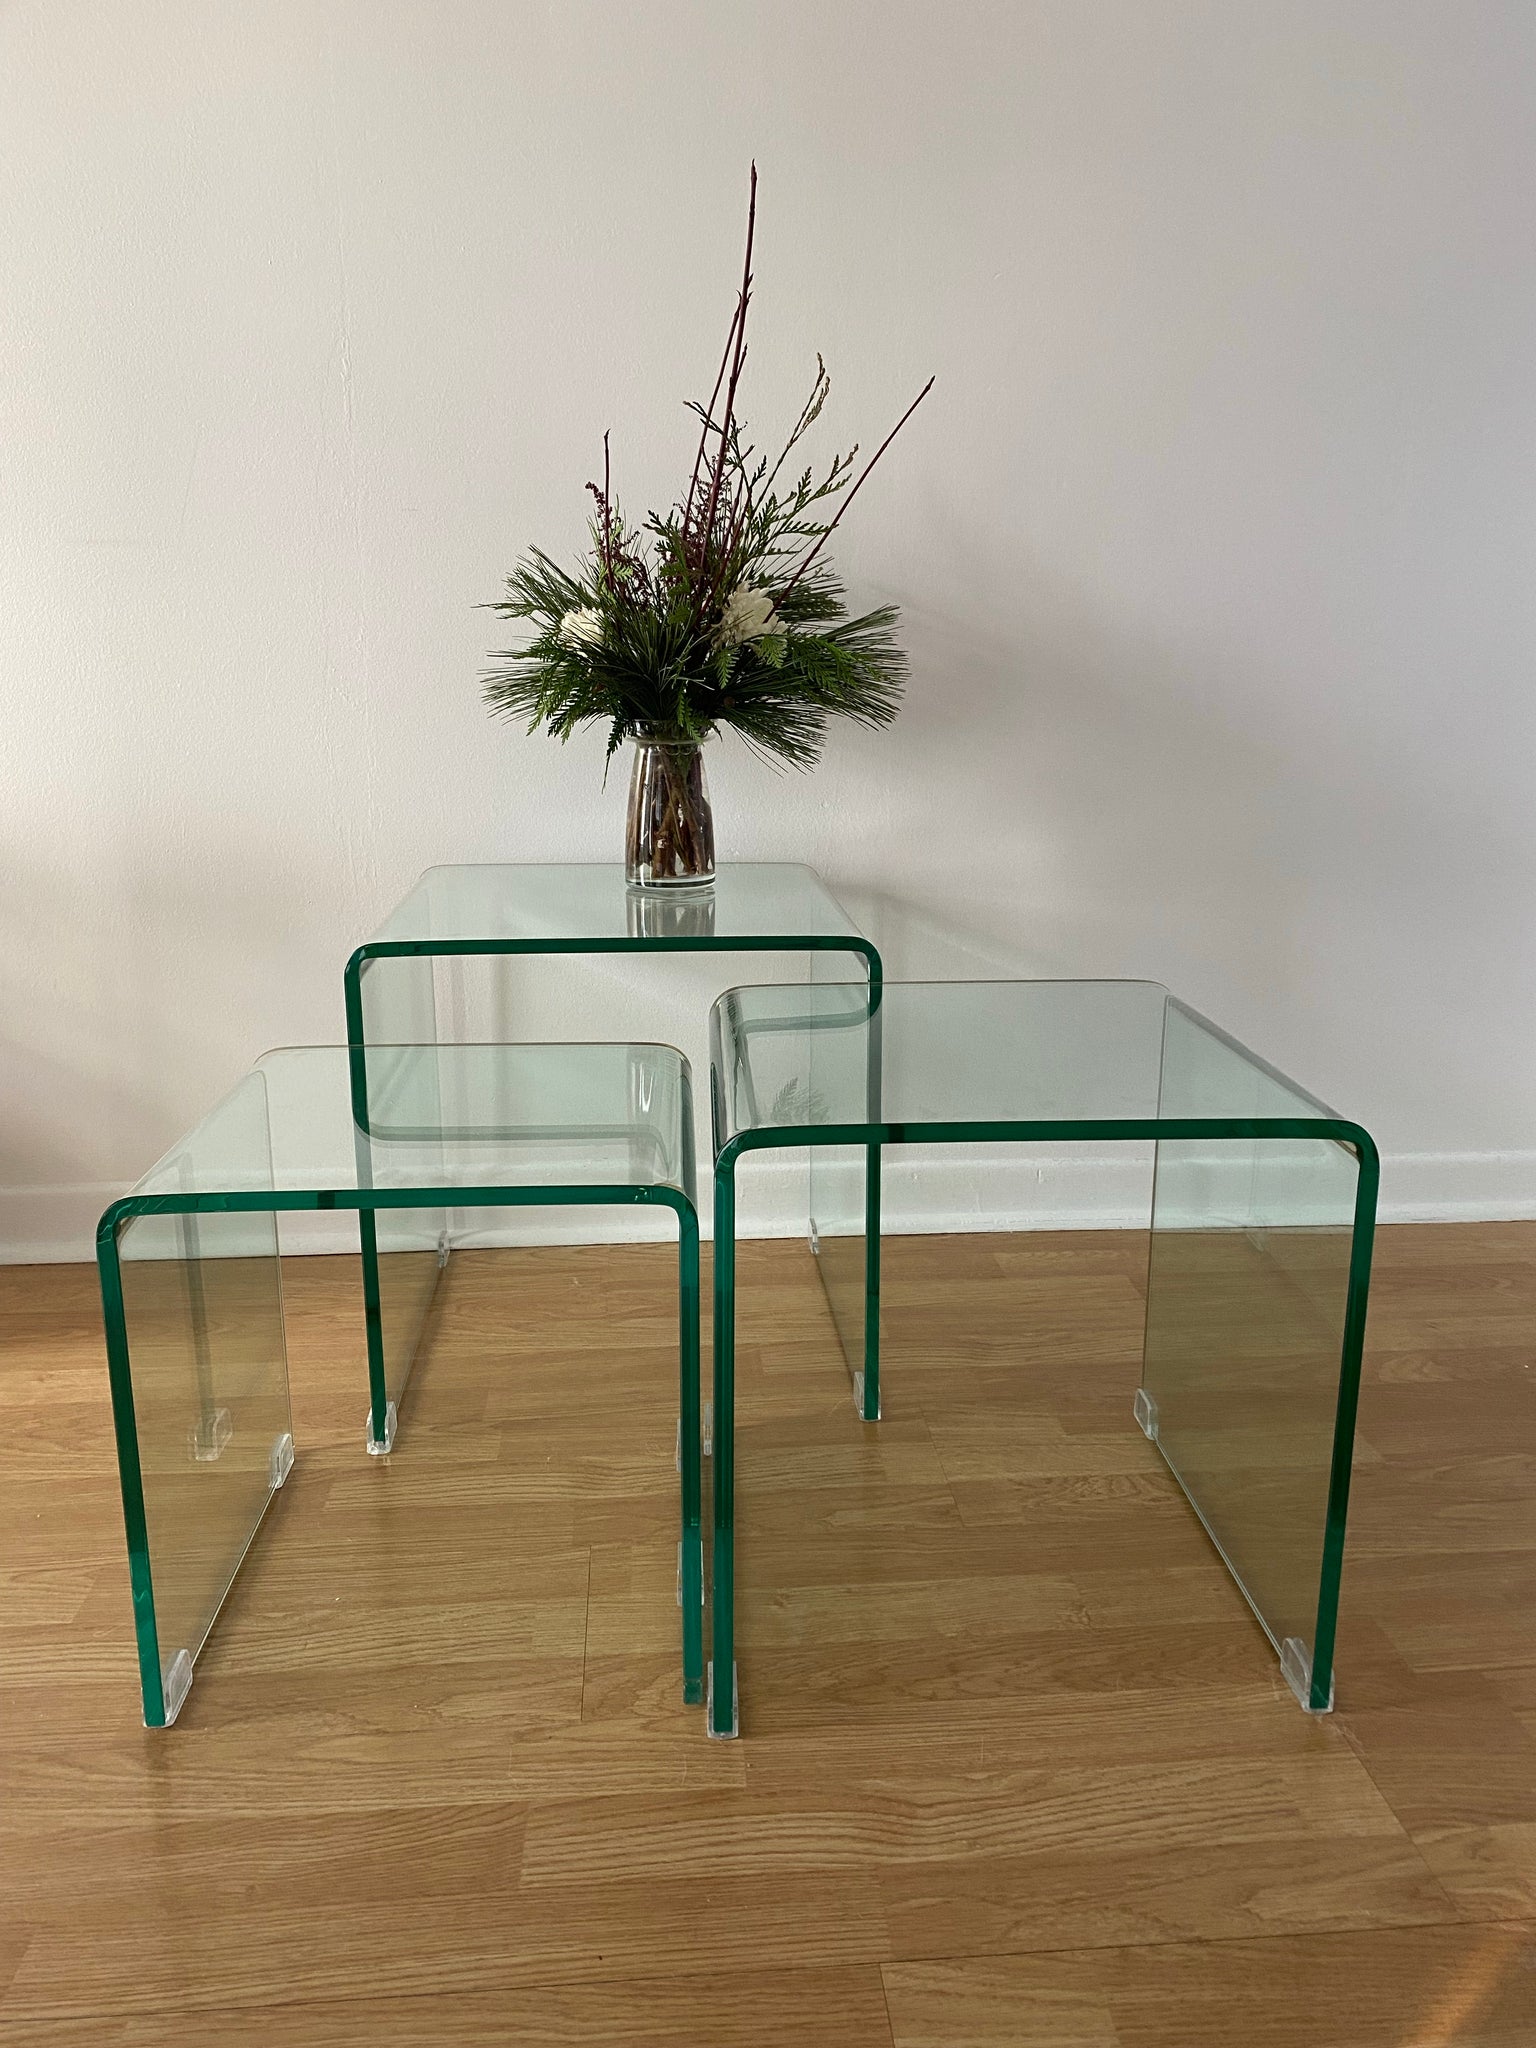 Trio of small tempered glass waterfall nesting side tables